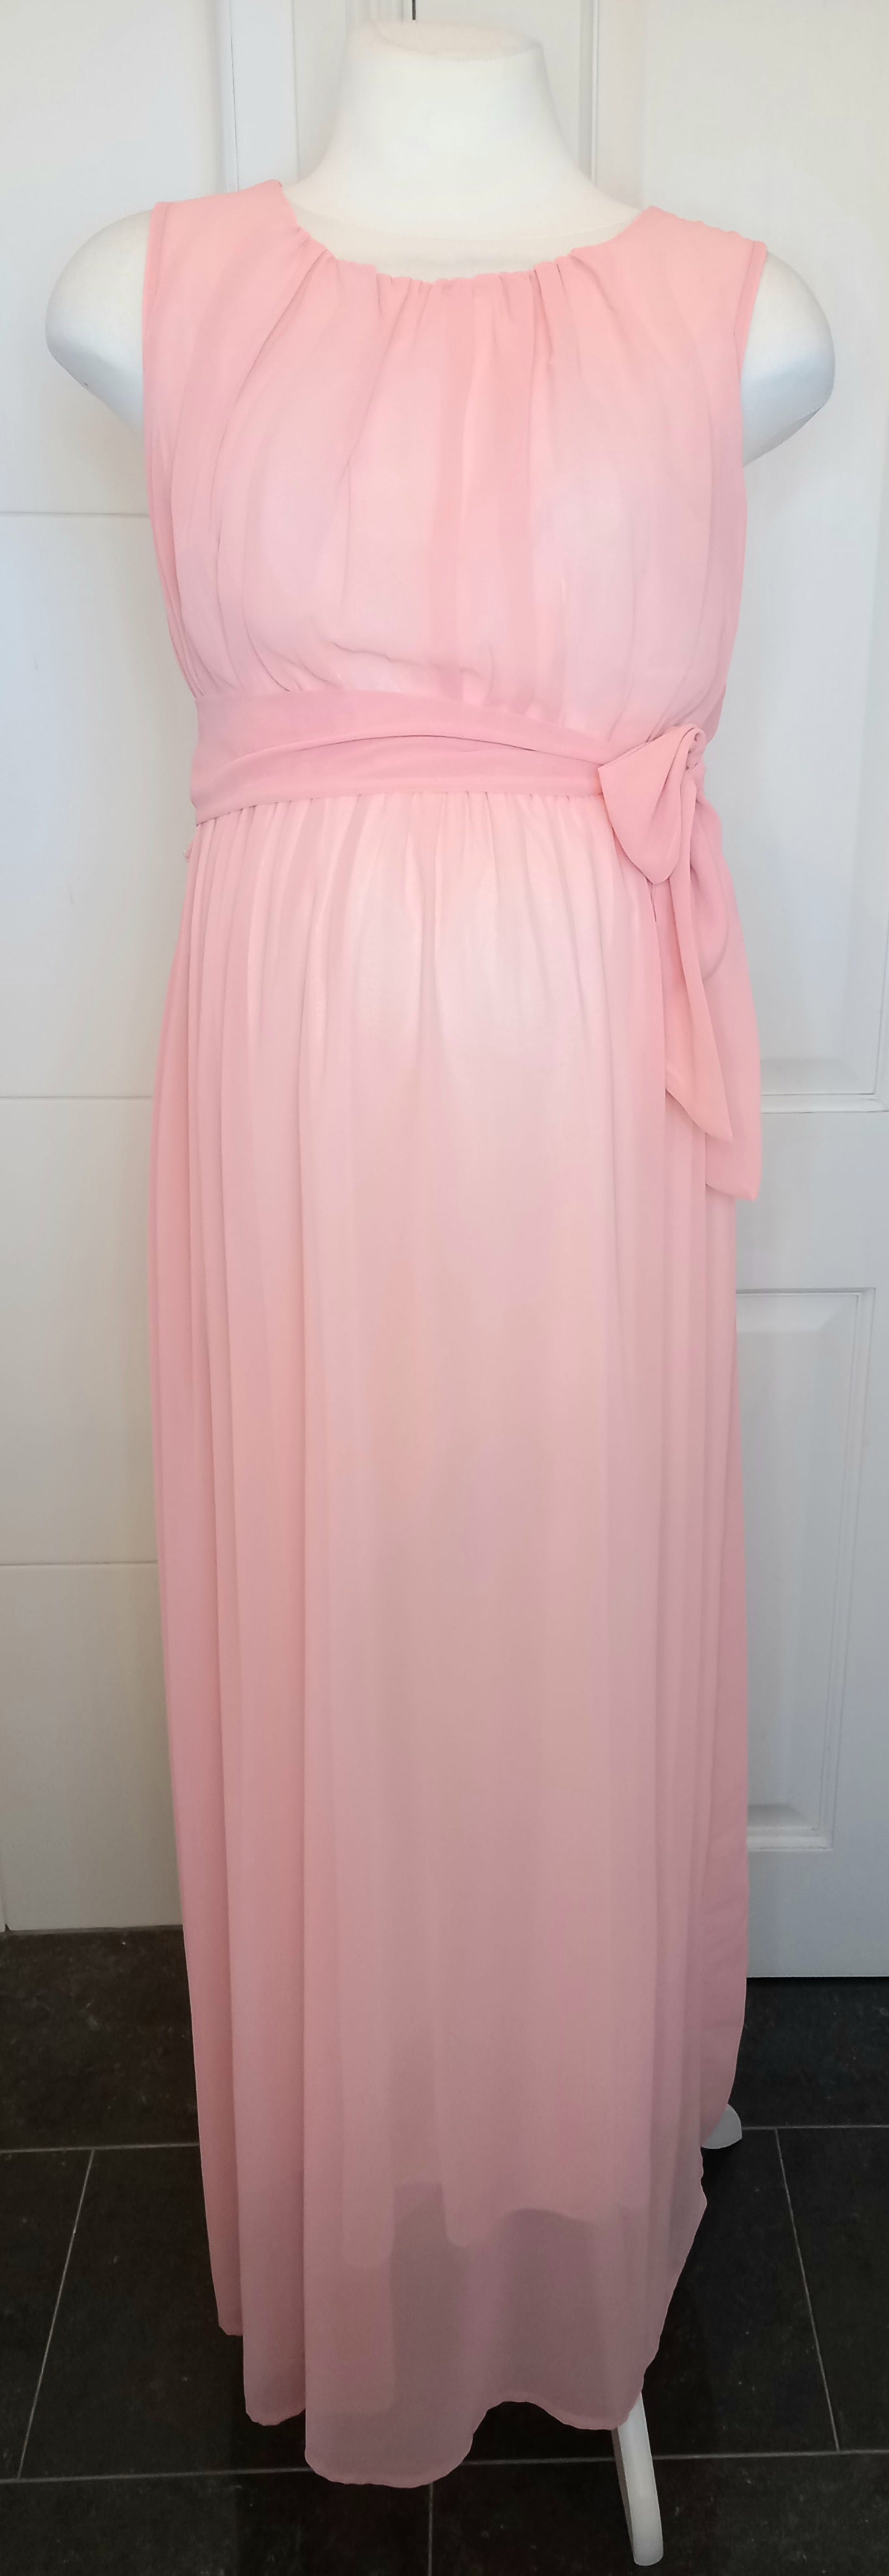 Calladream Coral Sleeveless Maxi Dress - Size M (Approx UK 10/12)